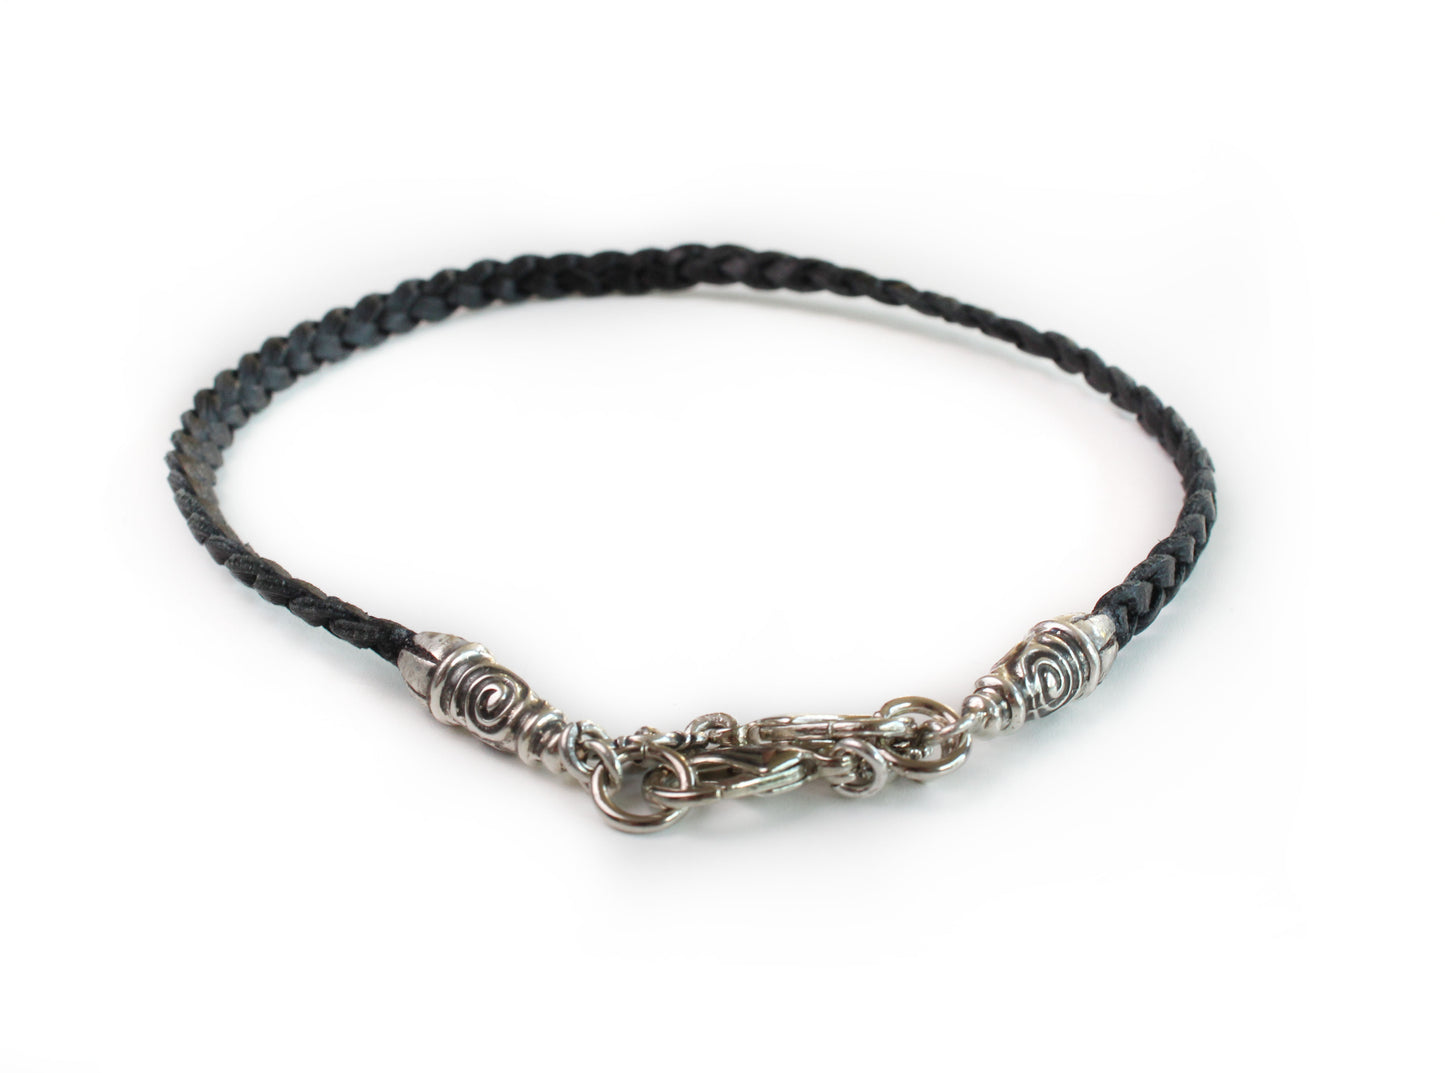 925 Sterling Silver Genuine Leather Bracelet/Choker/Strap with three Hand-braided double strands, Brown, or Black.- P17  ​